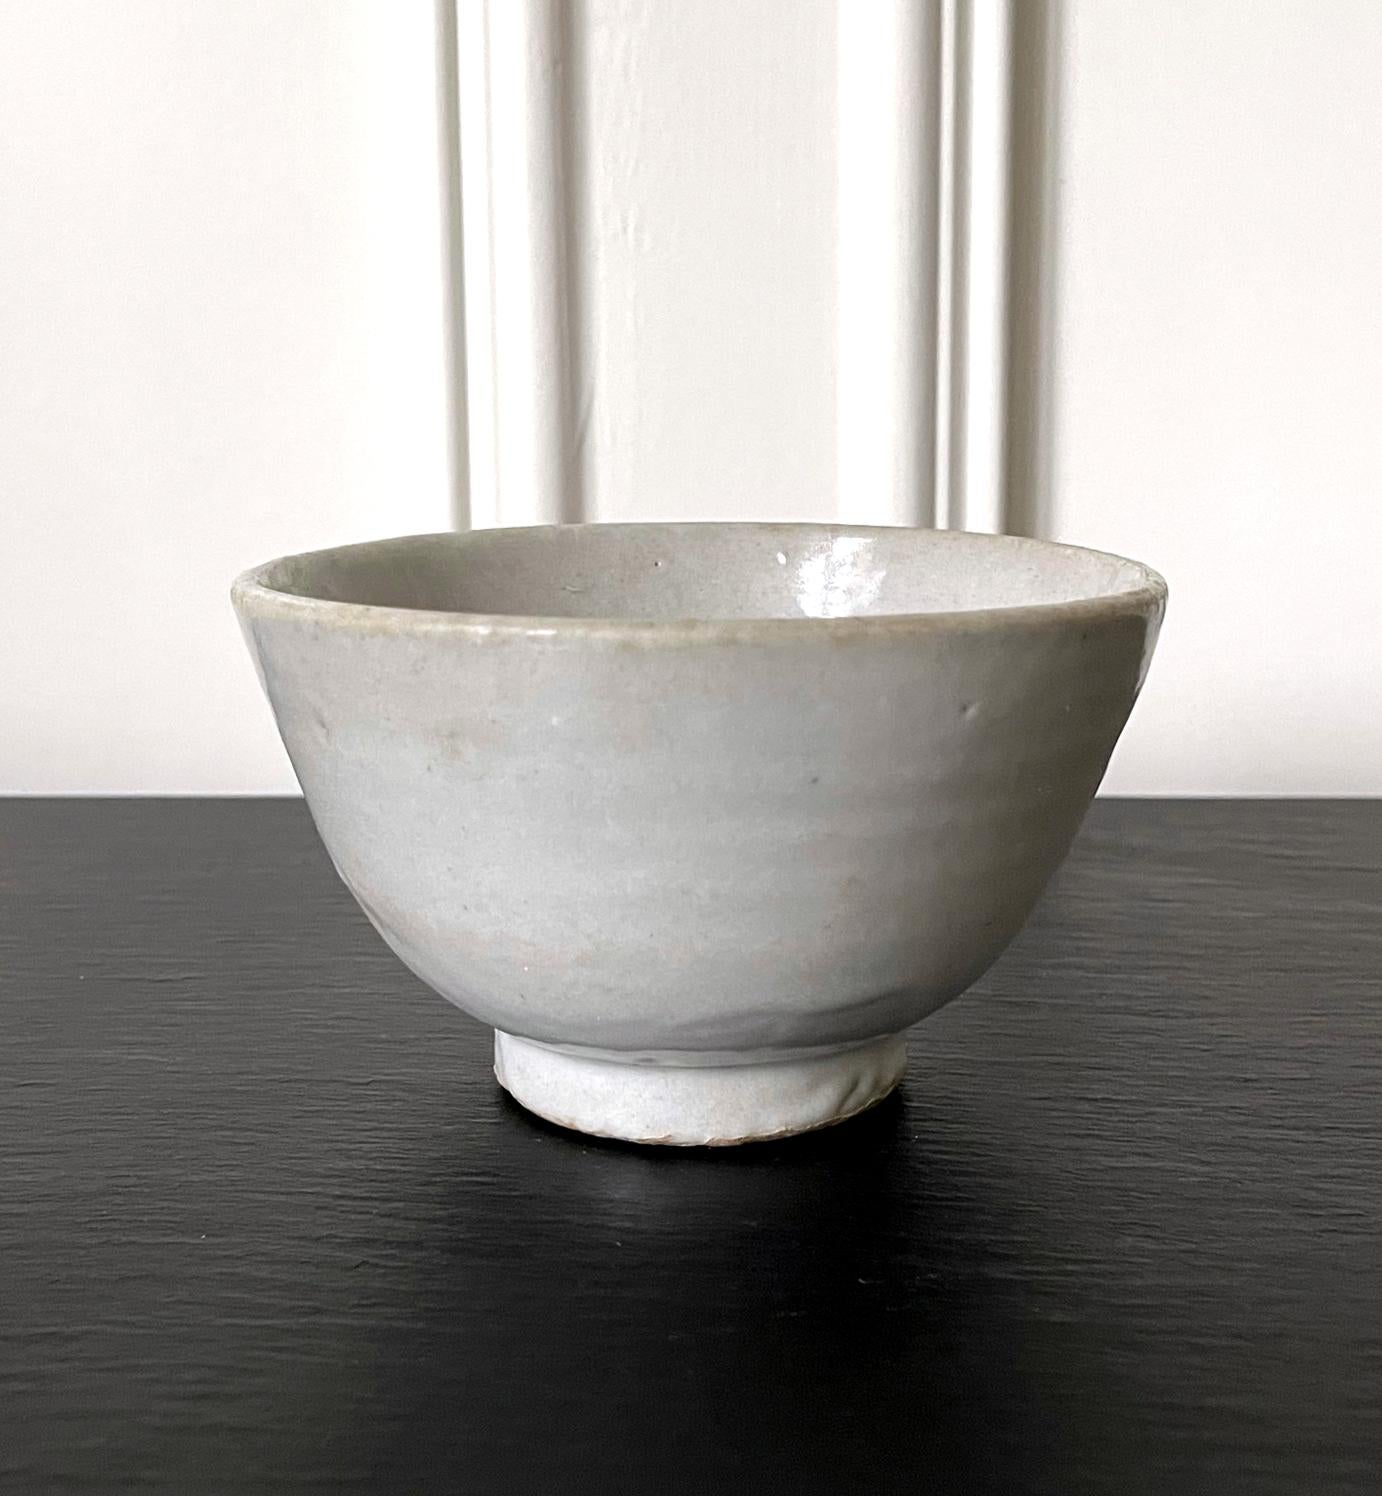 A Korean ceramic rice bowl covered in a white glaze with a hint of bluish green color circa 19th century toward the end of Joseon Dynasty. The deep bowl was thickly potted and made for everyday use, featuring a classic form with a short cylindrical